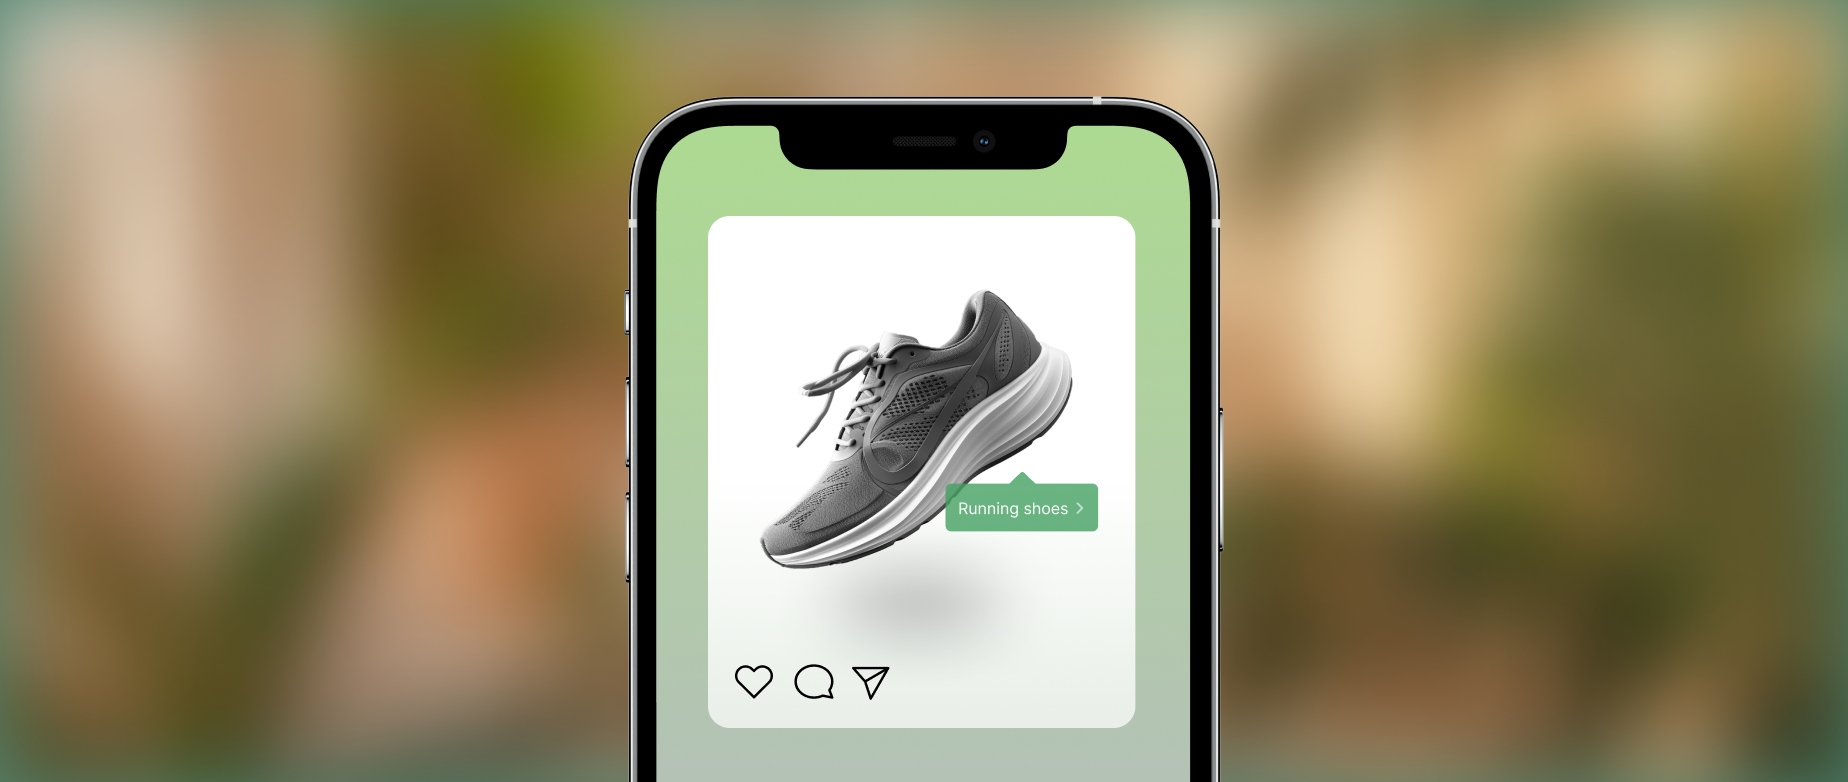 image of a retail media ad with running shoes on social media